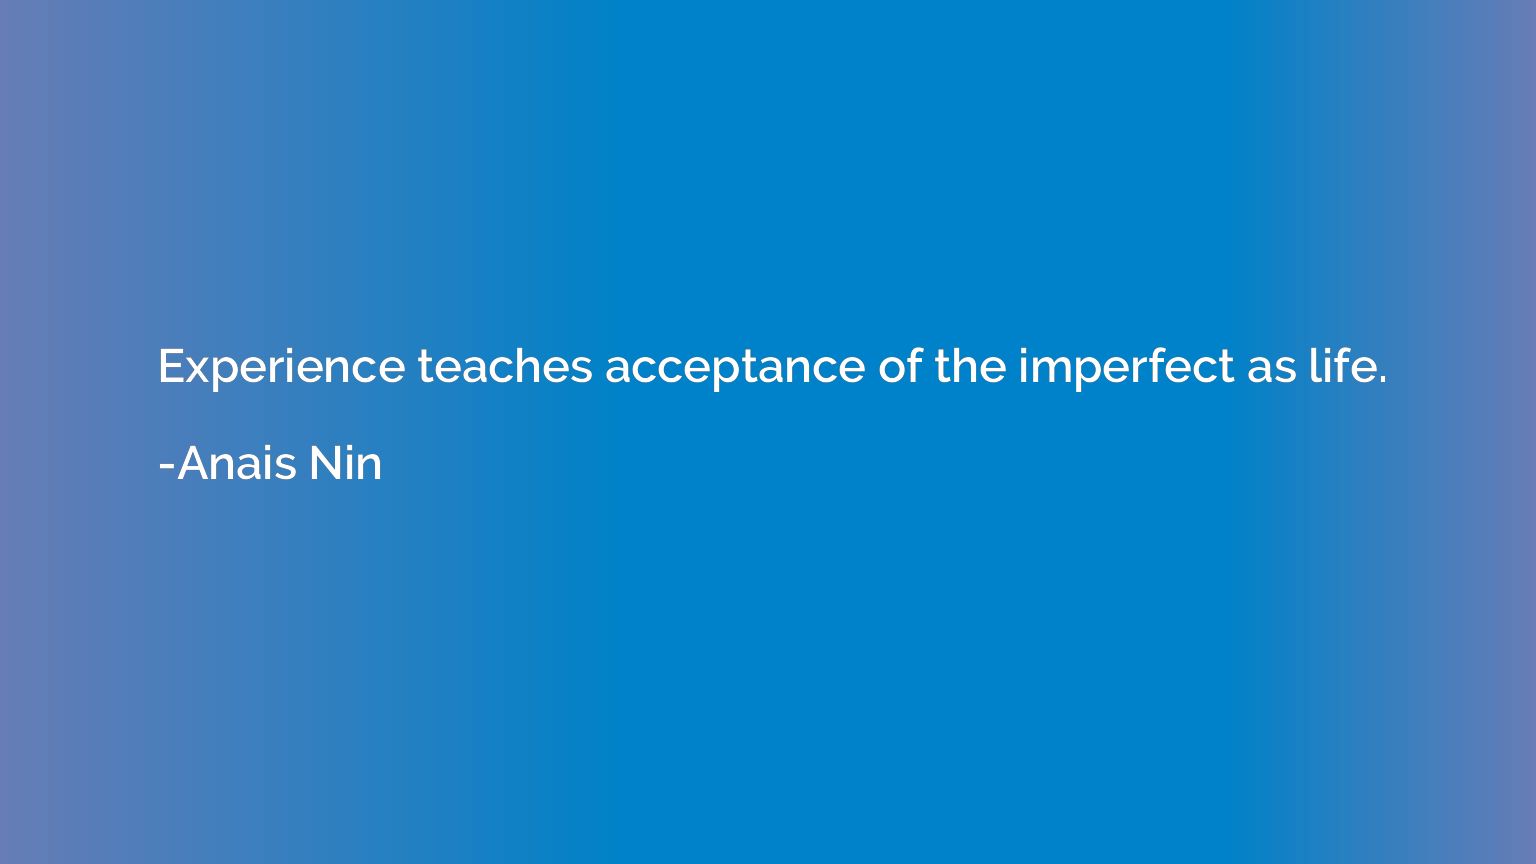 Experience teaches acceptance of the imperfect as life.